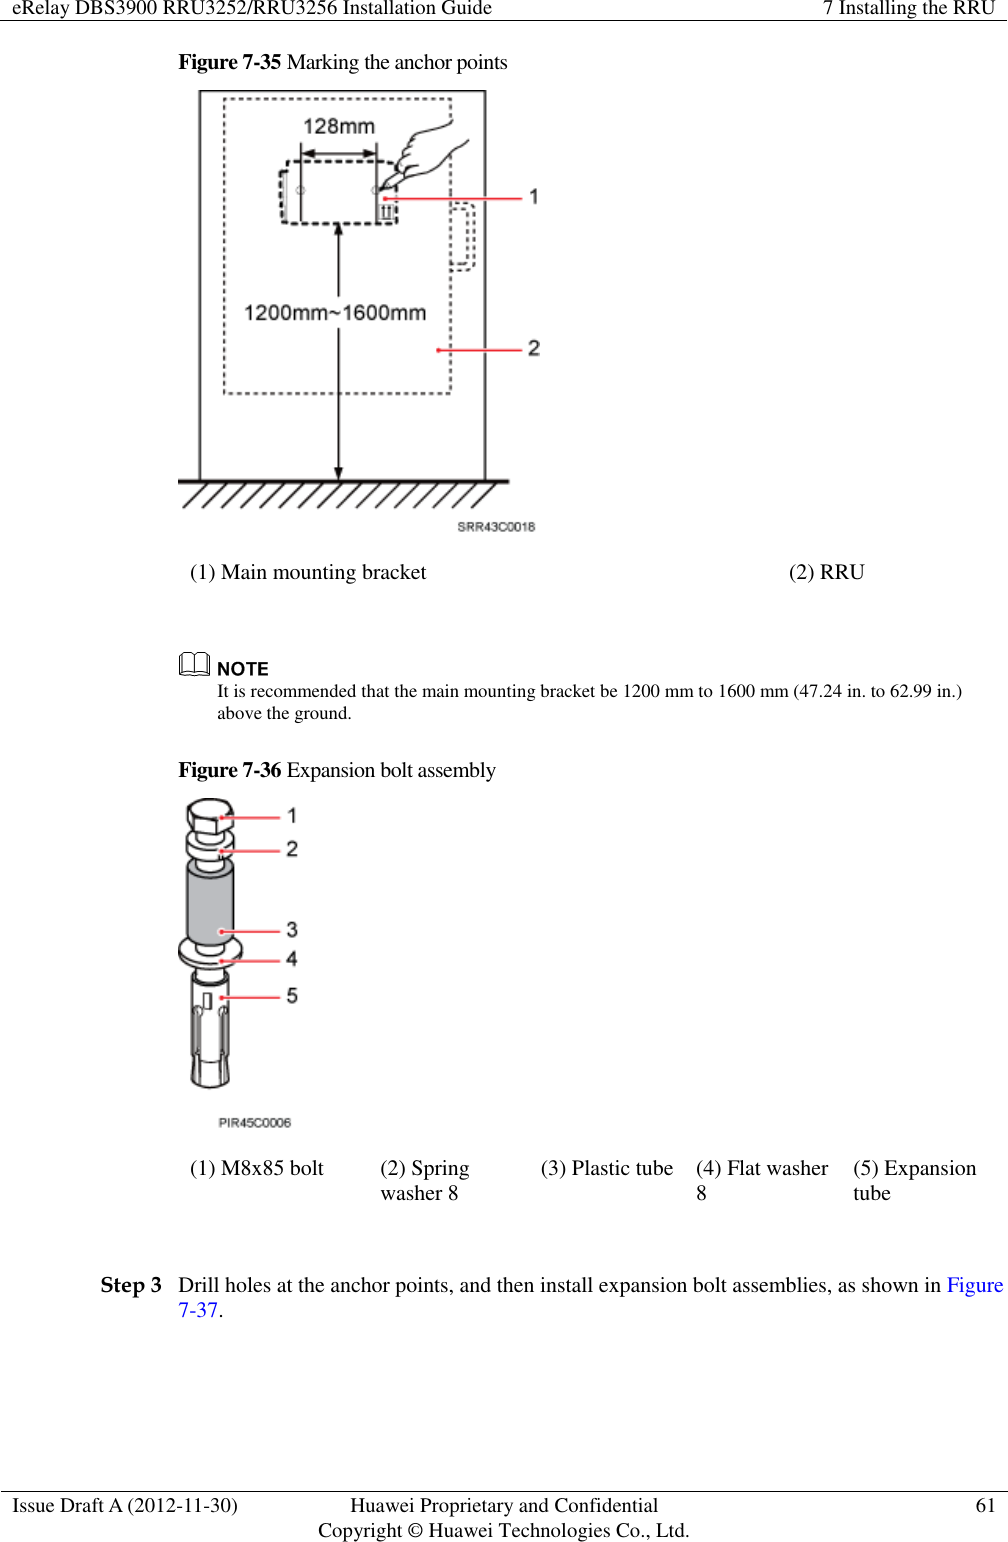 eRelay DBS3900 RRU3252/RRU3256 Installation Guide 7 Installing the RRU  Issue Draft A (2012-11-30) Huawei Proprietary and Confidential                                     Copyright © Huawei Technologies Co., Ltd. 61  Figure 7-35 Marking the anchor points  (1) Main mounting bracket (2) RRU   It is recommended that the main mounting bracket be 1200 mm to 1600 mm (47.24 in. to 62.99 in.) above the ground.   Figure 7-36 Expansion bolt assembly  (1) M8x85 bolt (2) Spring washer 8 (3) Plastic tube (4) Flat washer 8 (5) Expansion tube  Step 3 Drill holes at the anchor points, and then install expansion bolt assemblies, as shown in Figure 7-37. 